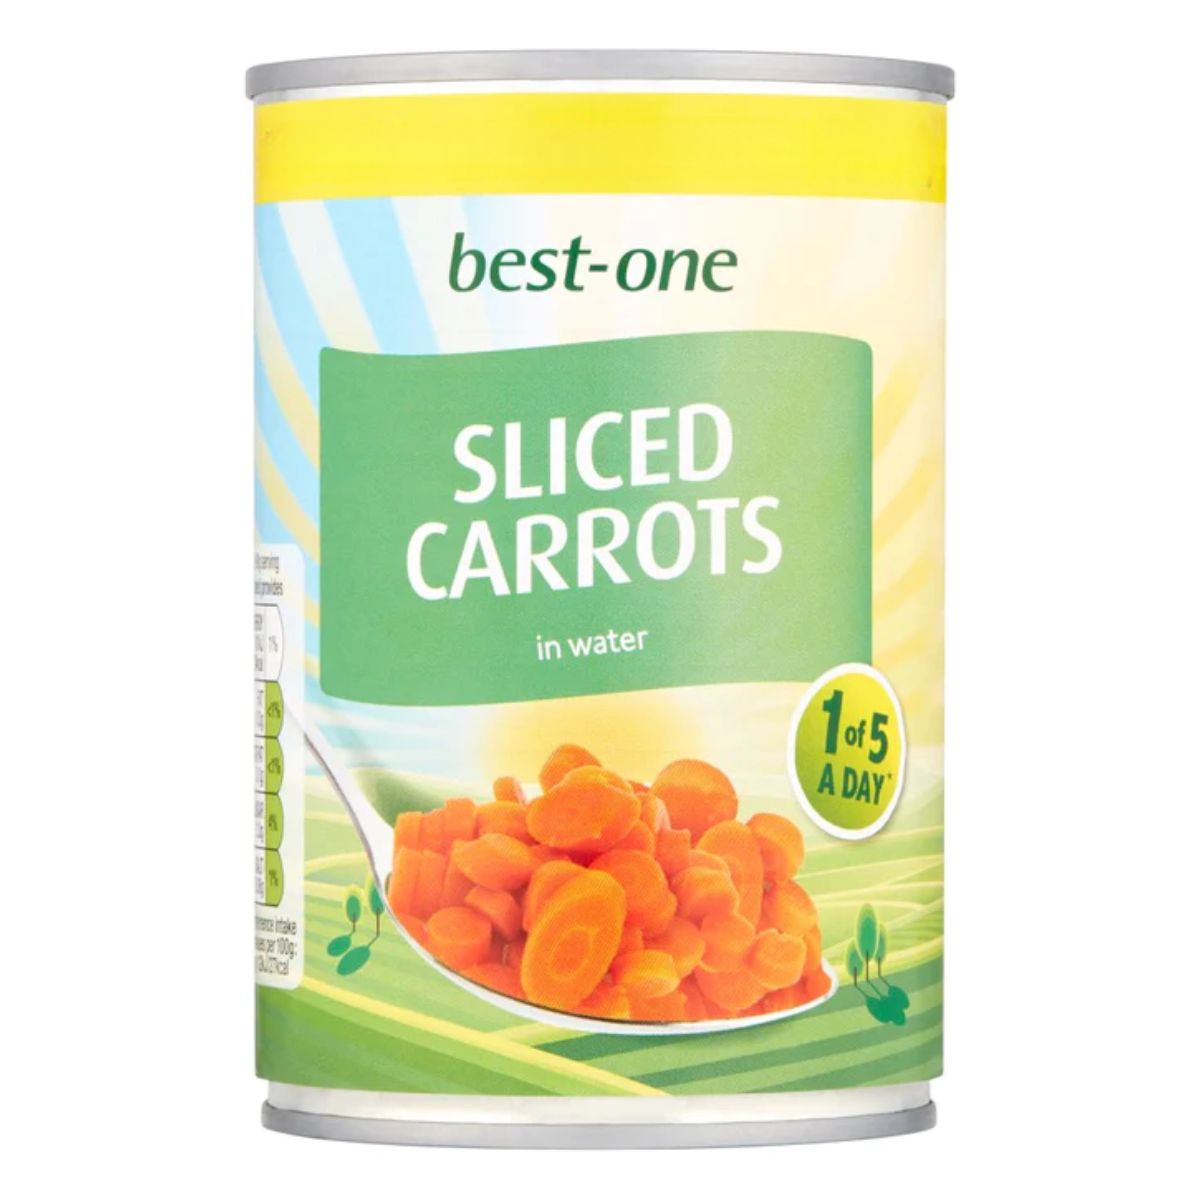 A can of Best One - Sliced Carrots in Water - 300g.